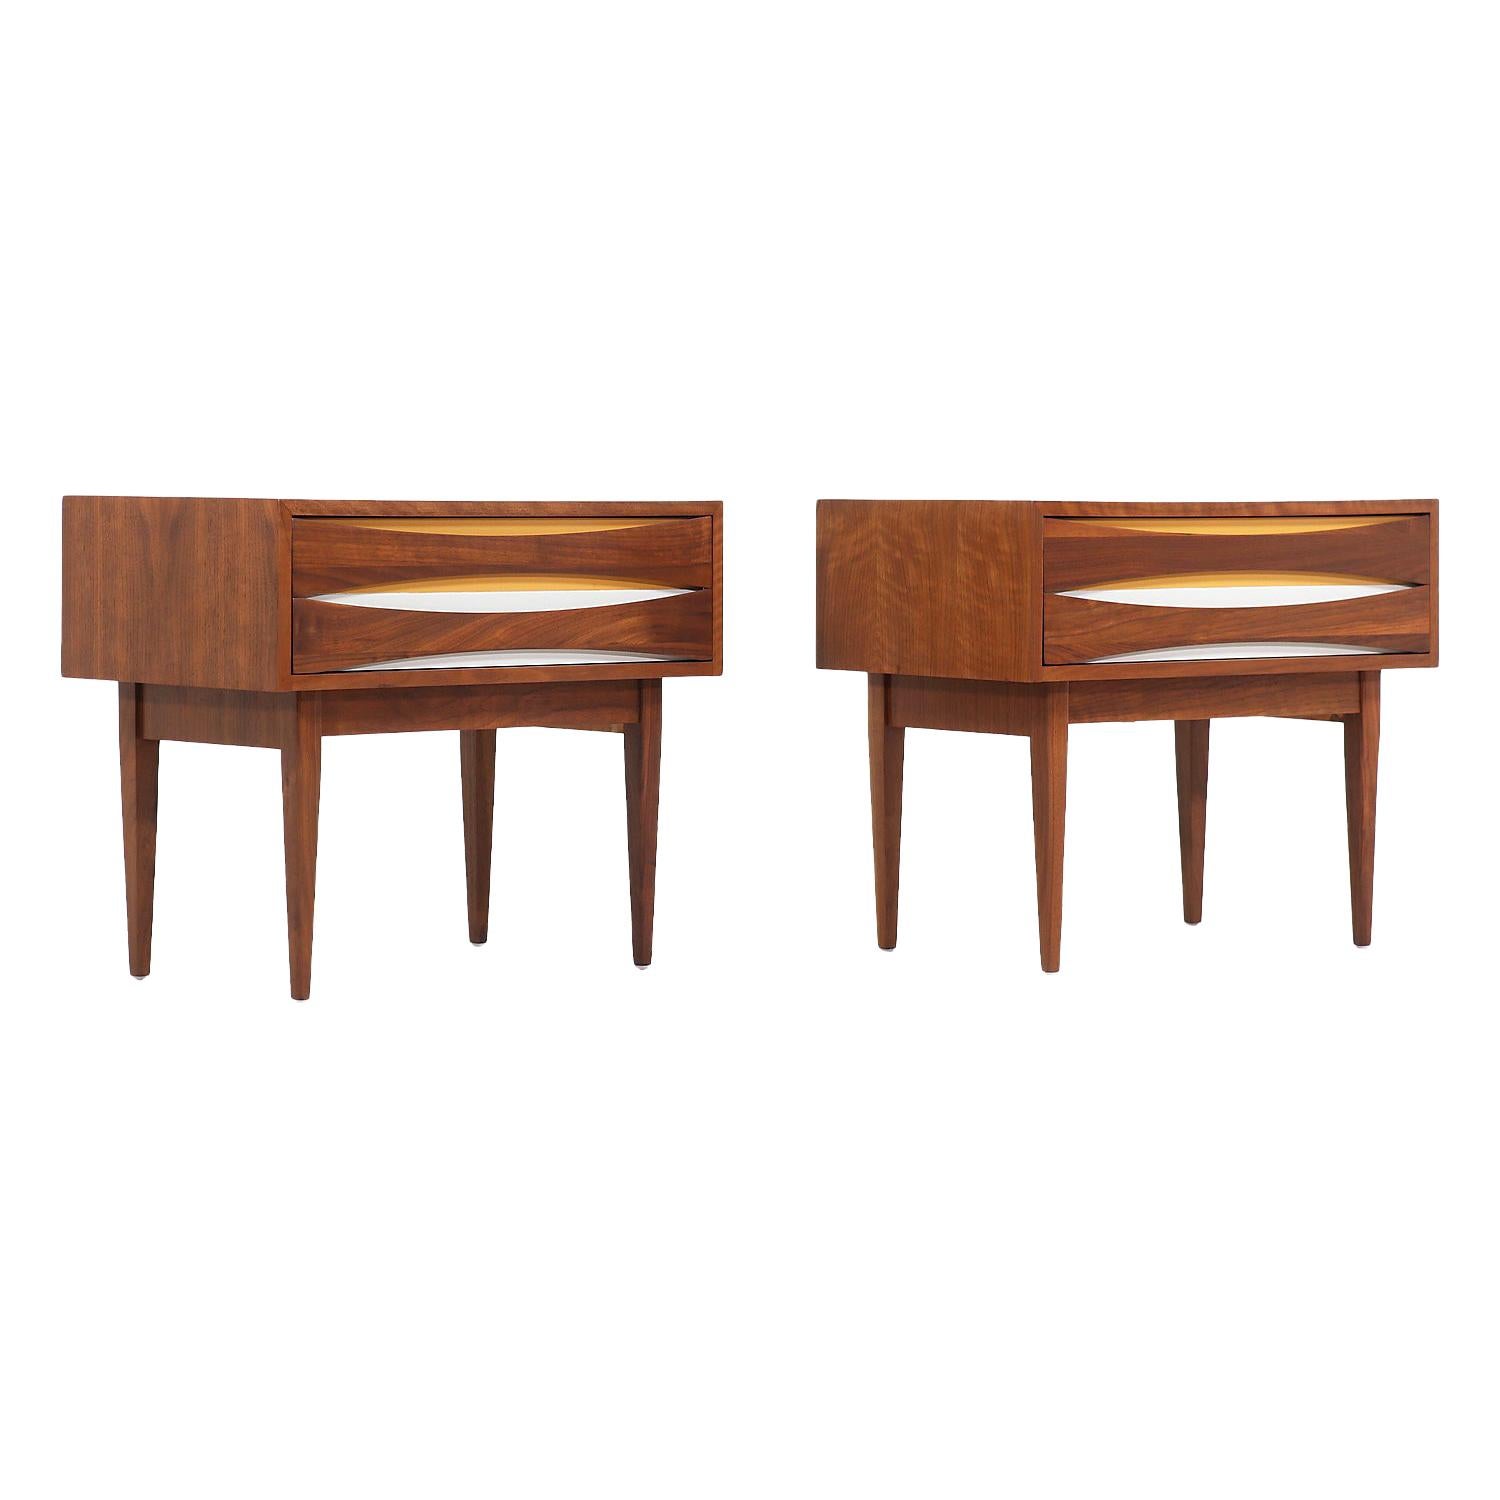 Mid-Century Modern Nightstands with Lacquered Bowtie Style Drawers